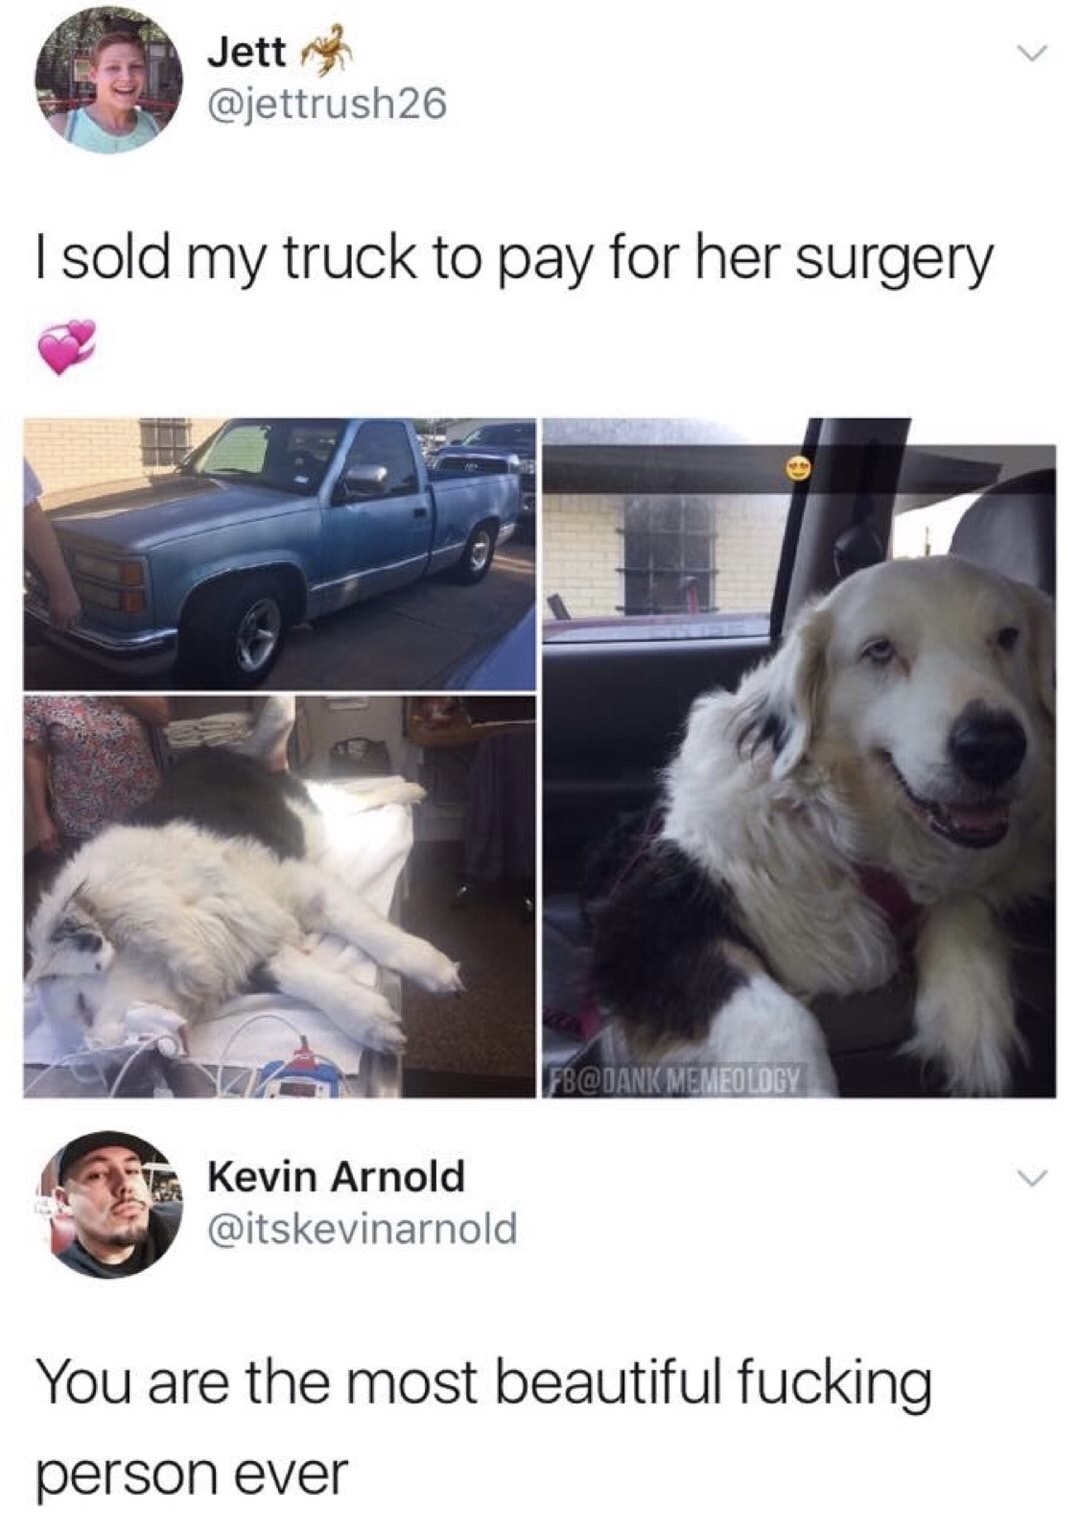 memes - sold my truck to pay for her surgery - Jett I sold my truck to pay for her surgery Fb Memeology Kevin Arnold You are the most beautiful fucking person ever